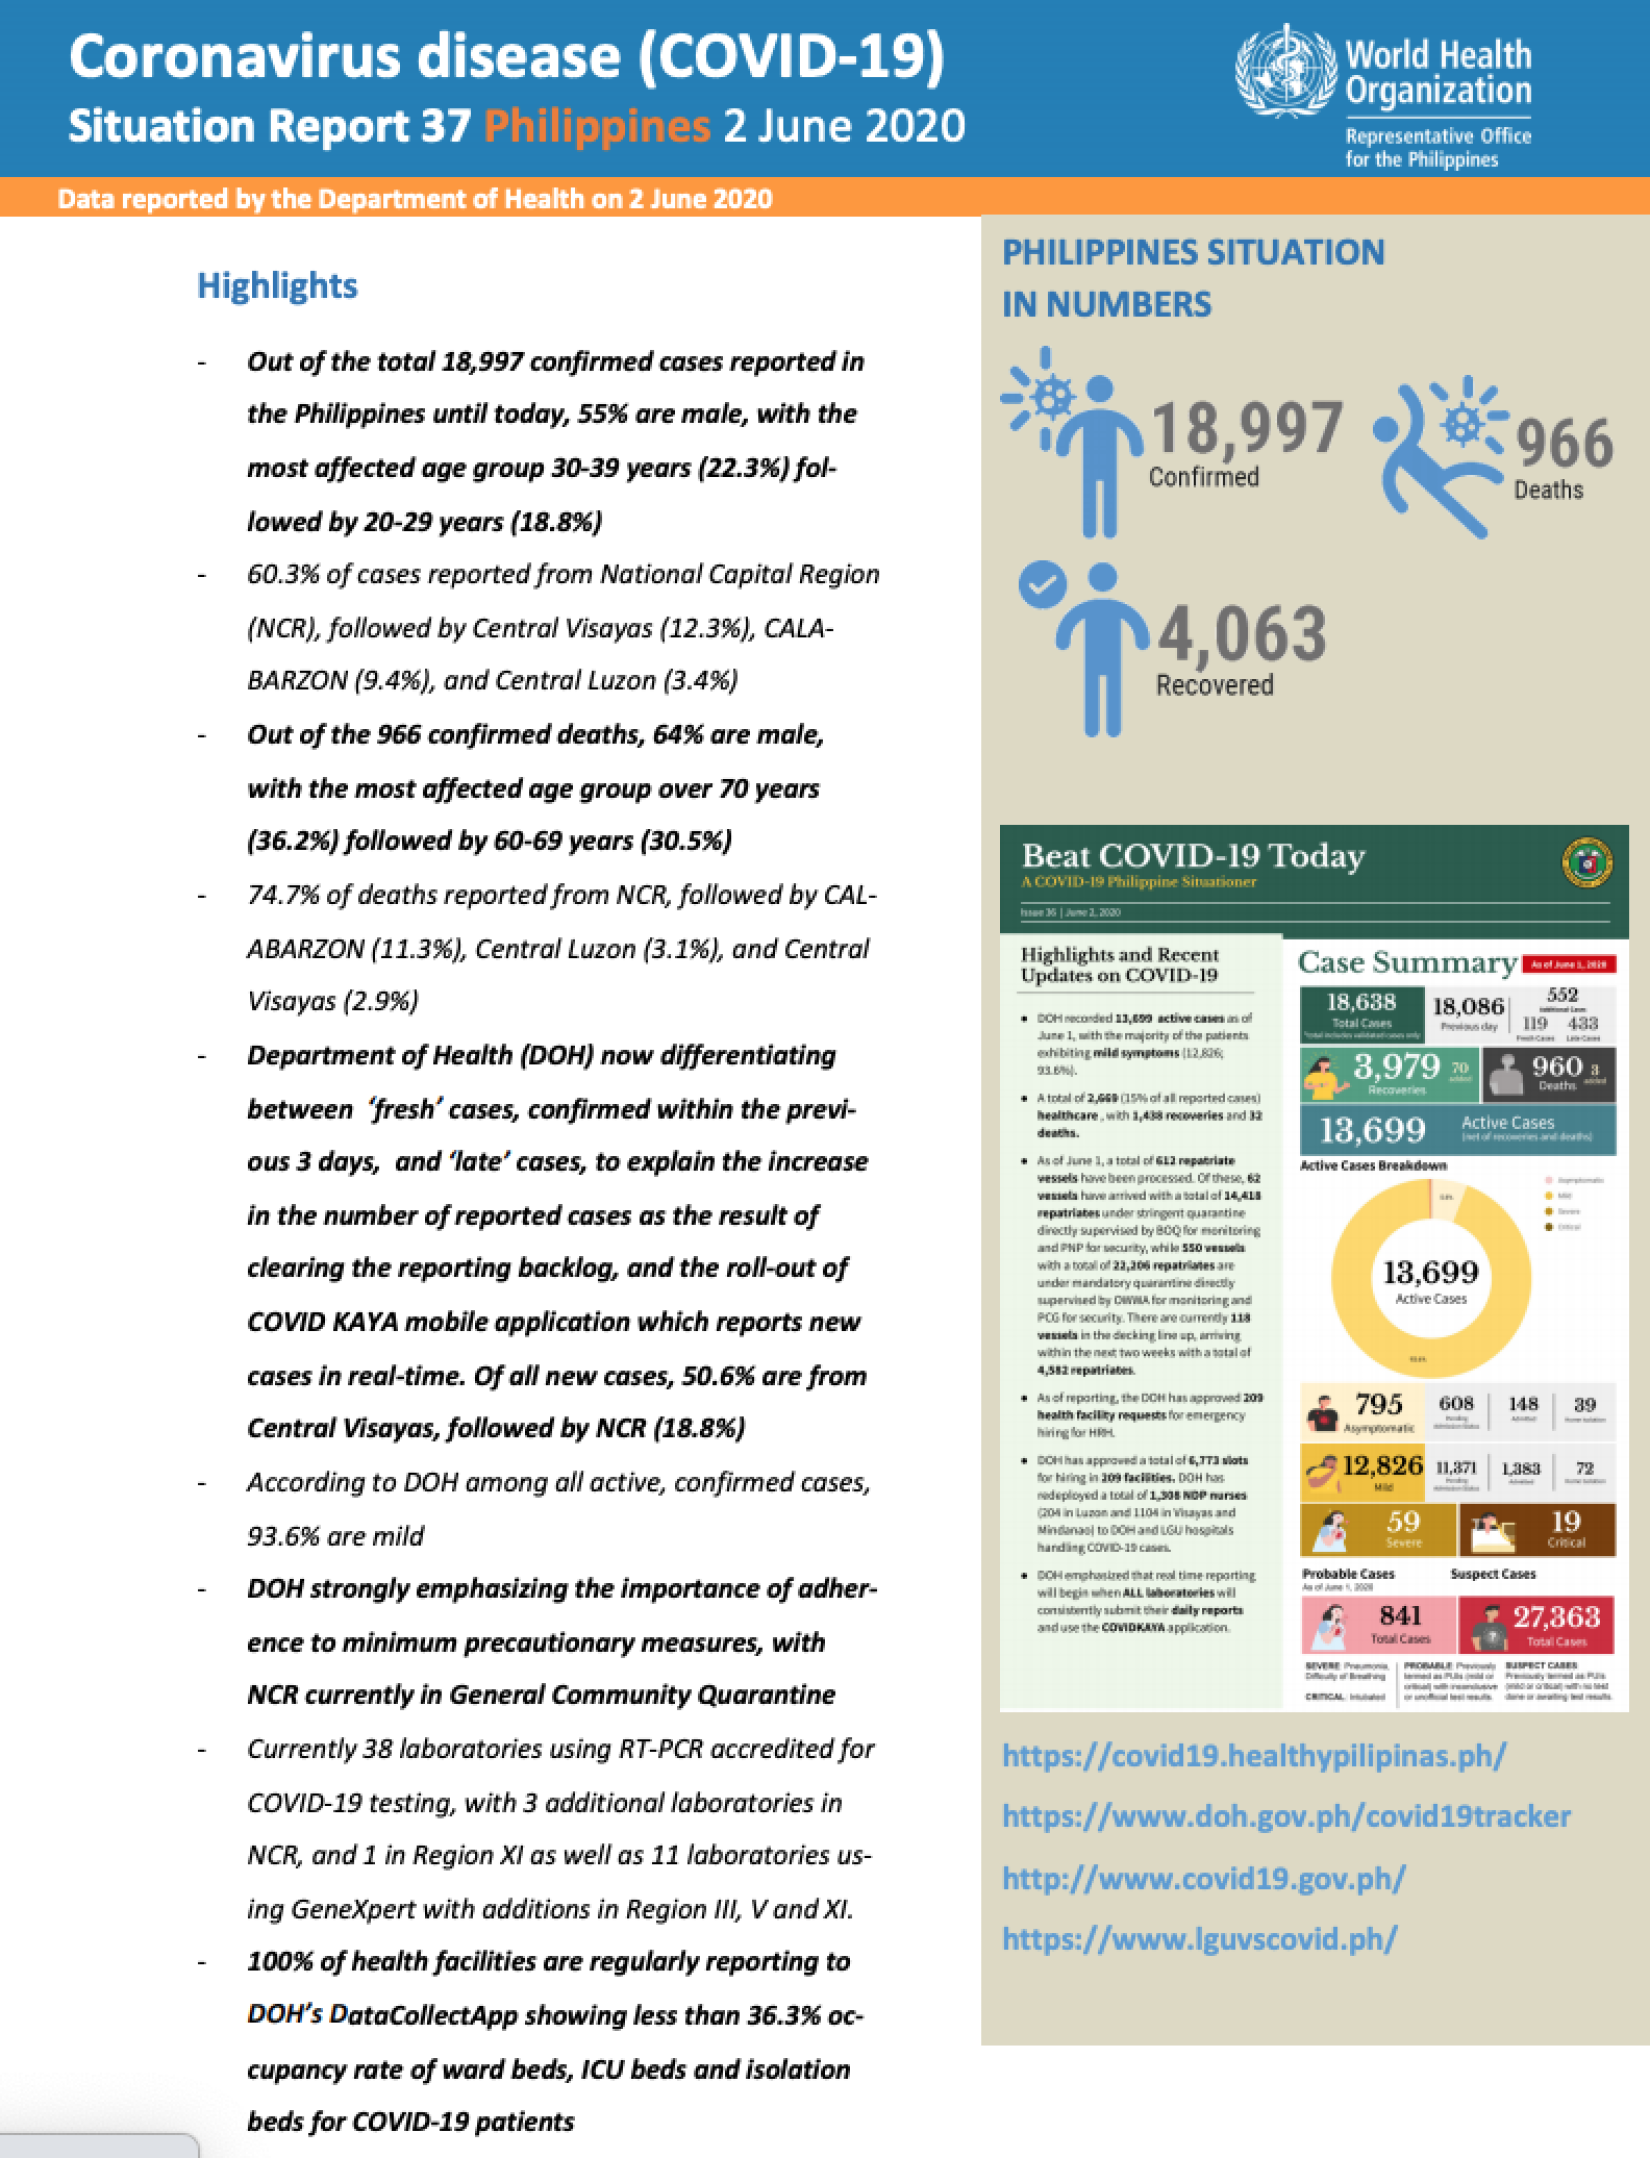 WHO COVID-19 Philippines Situation Report #37 (2 June 2020)